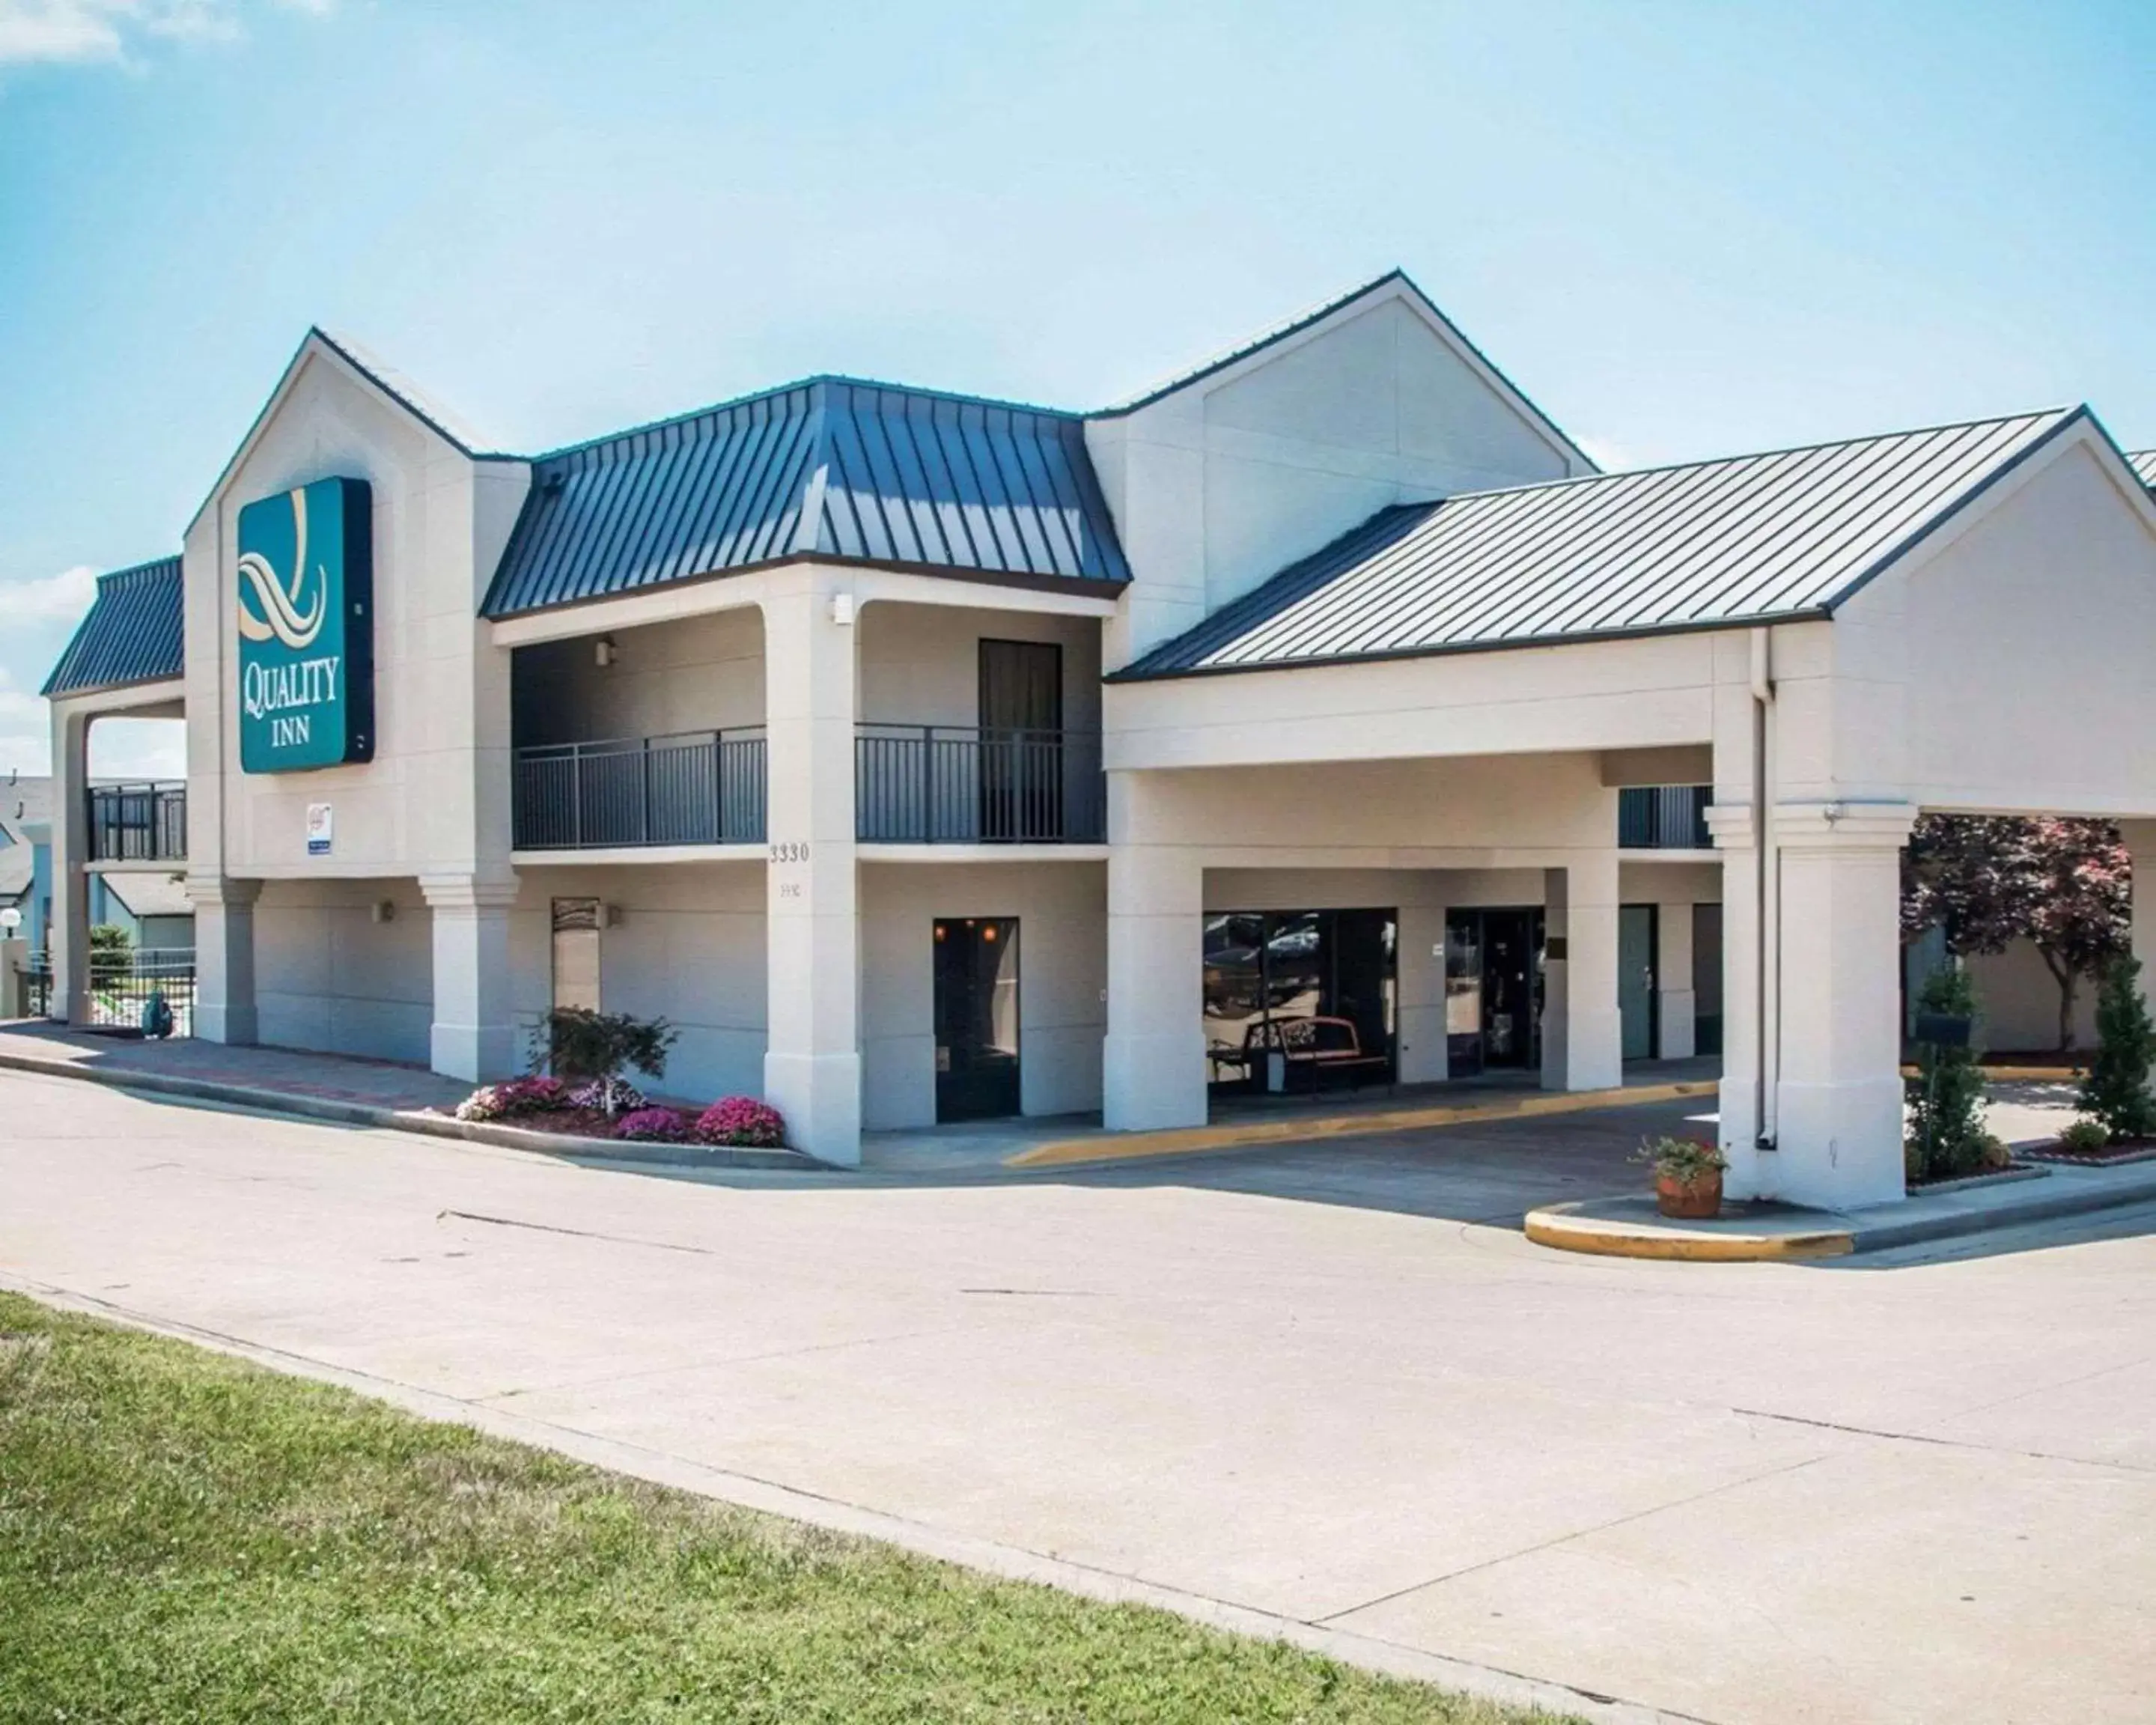 Property Building in Quality Inn South Springfield